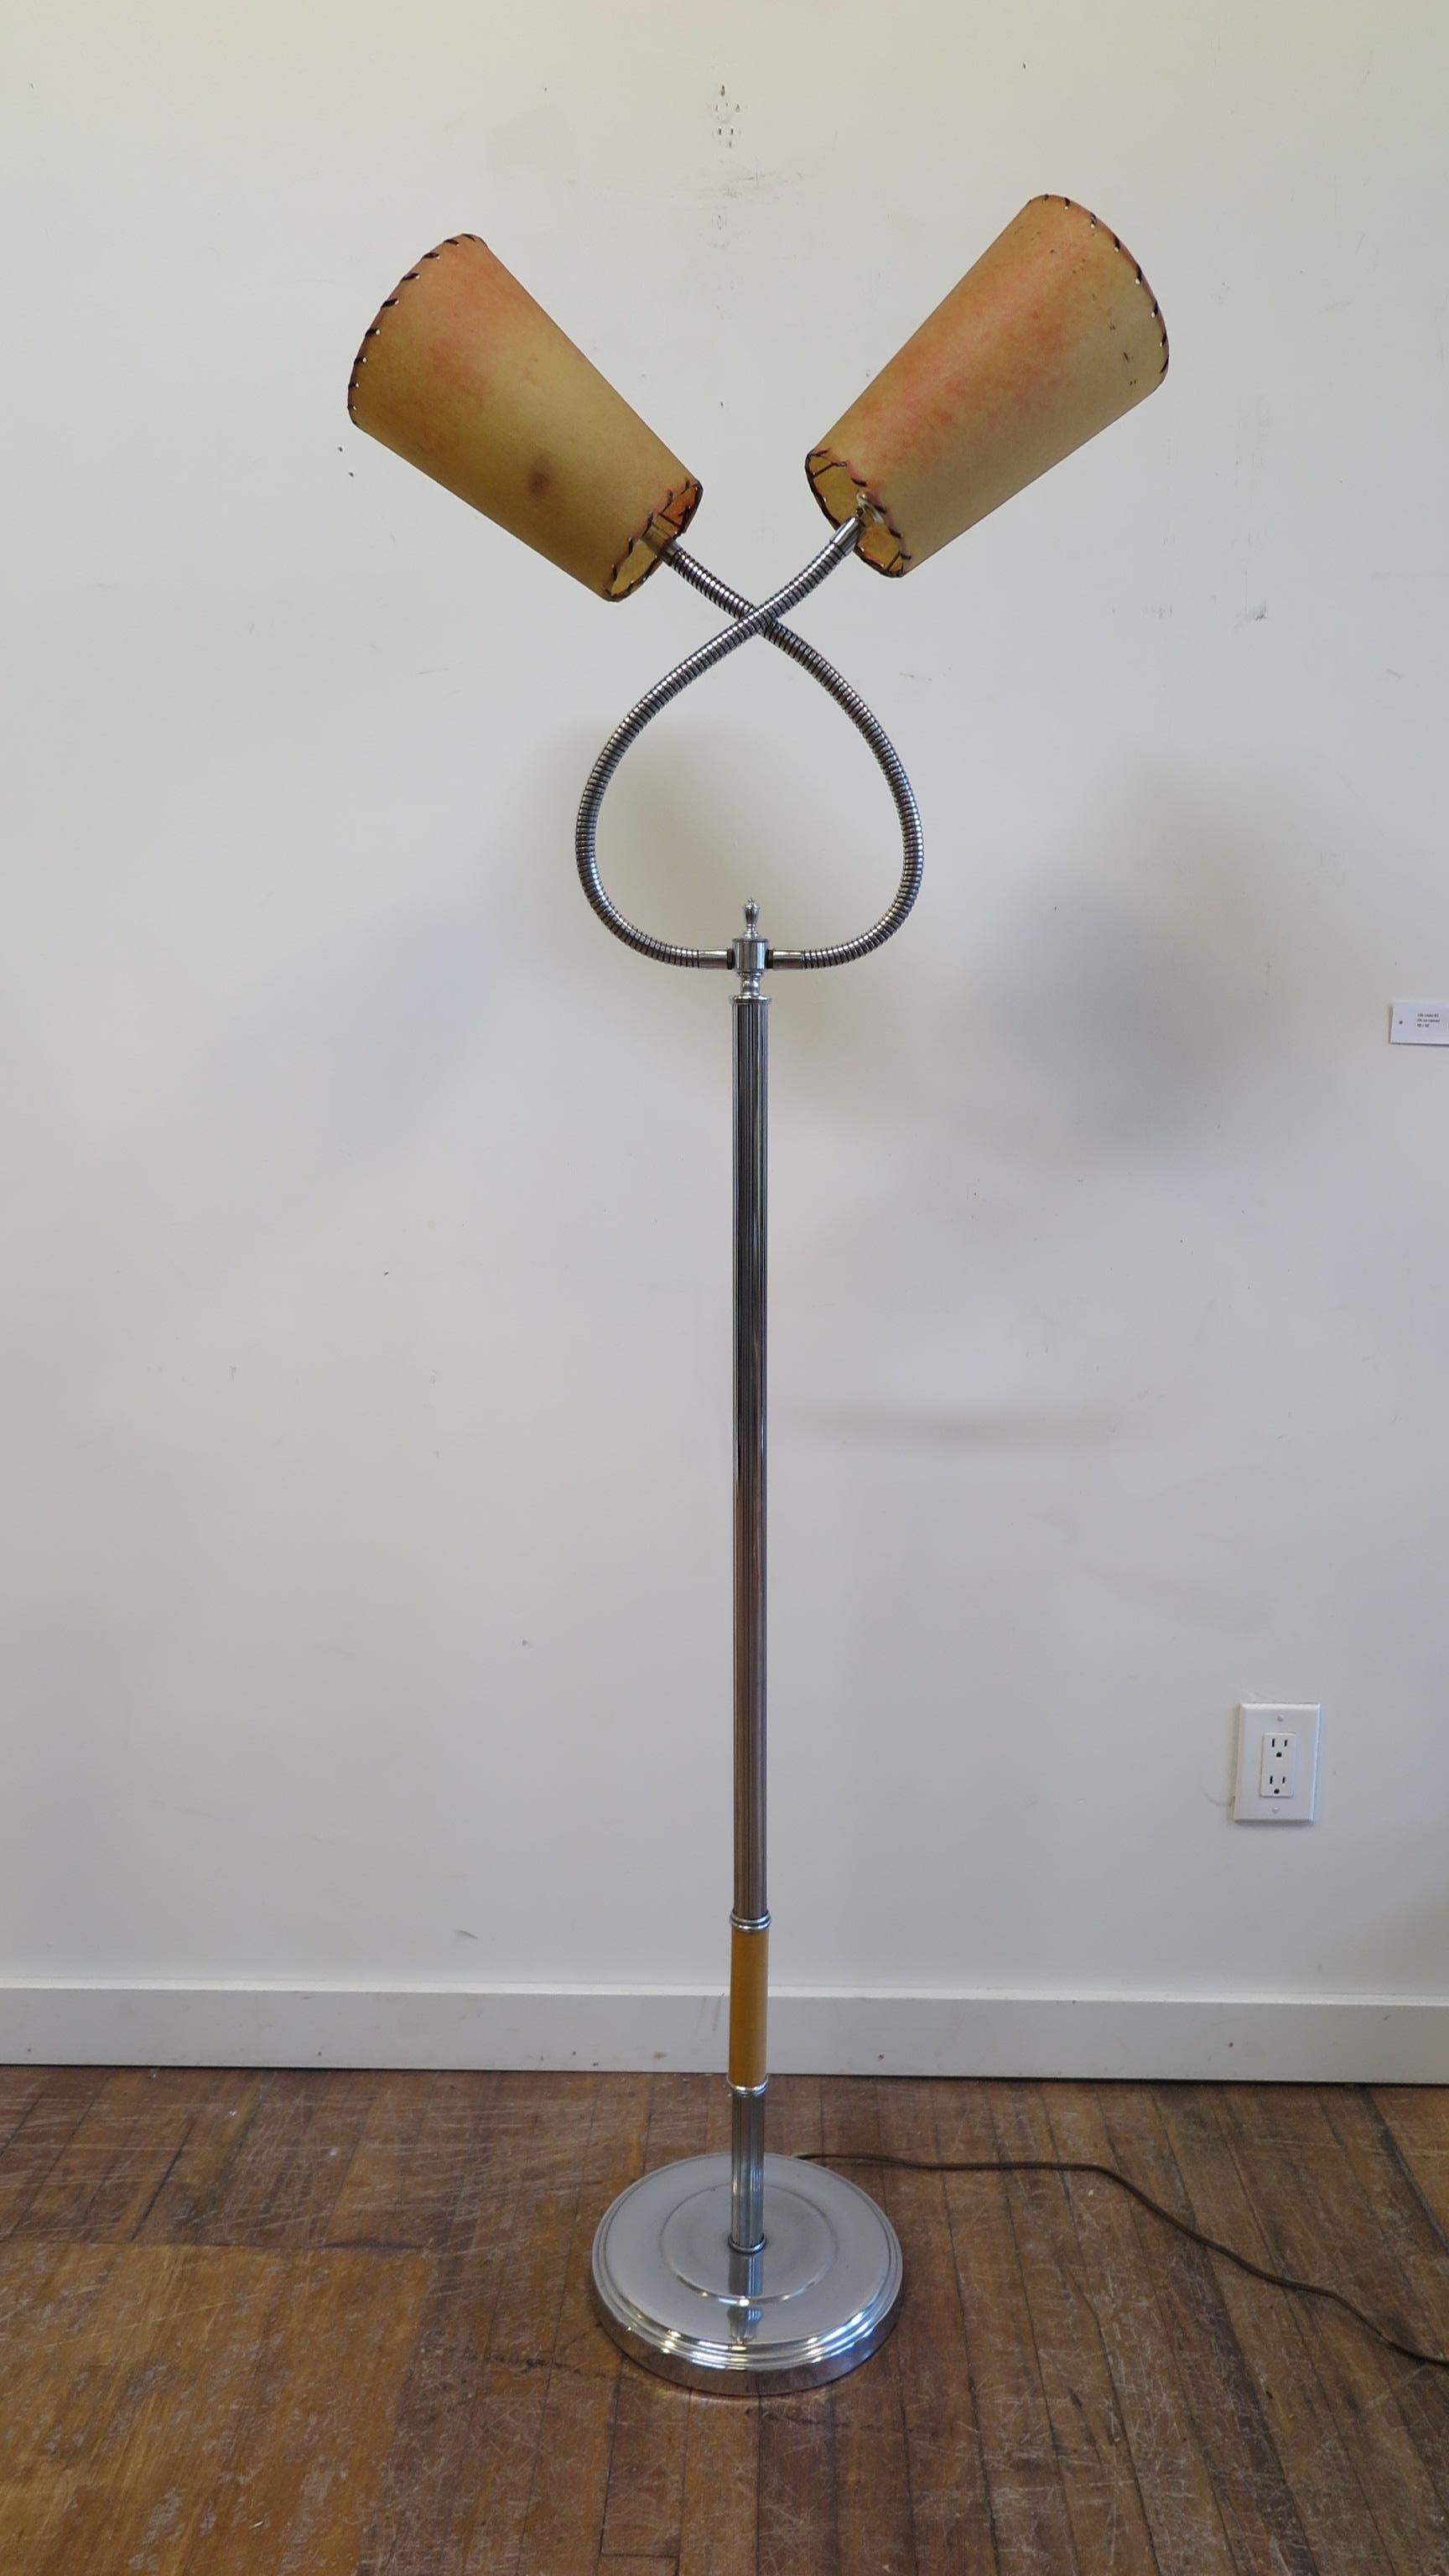 Midcentury chrome double goose heck floor lamp. Chrome reeded pole with two articulating goose neck fixtures having original parchment shades. Can be positioned in various arrangements using the two goose necks. The goose necks are very